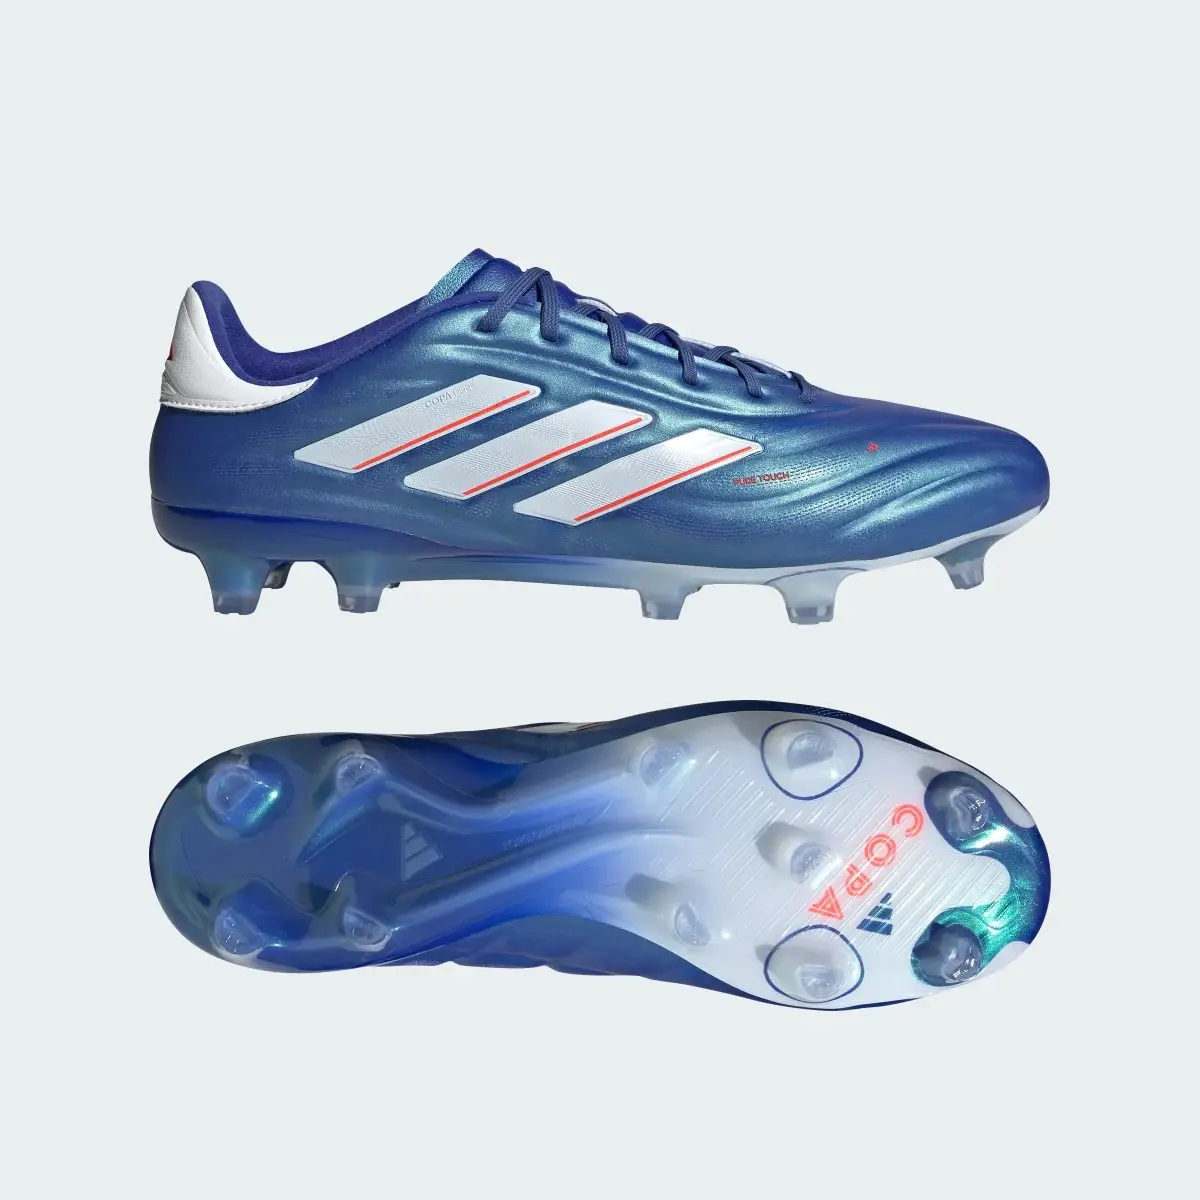 Adidas Copa Pure II.1 Firm Ground Boots. 1